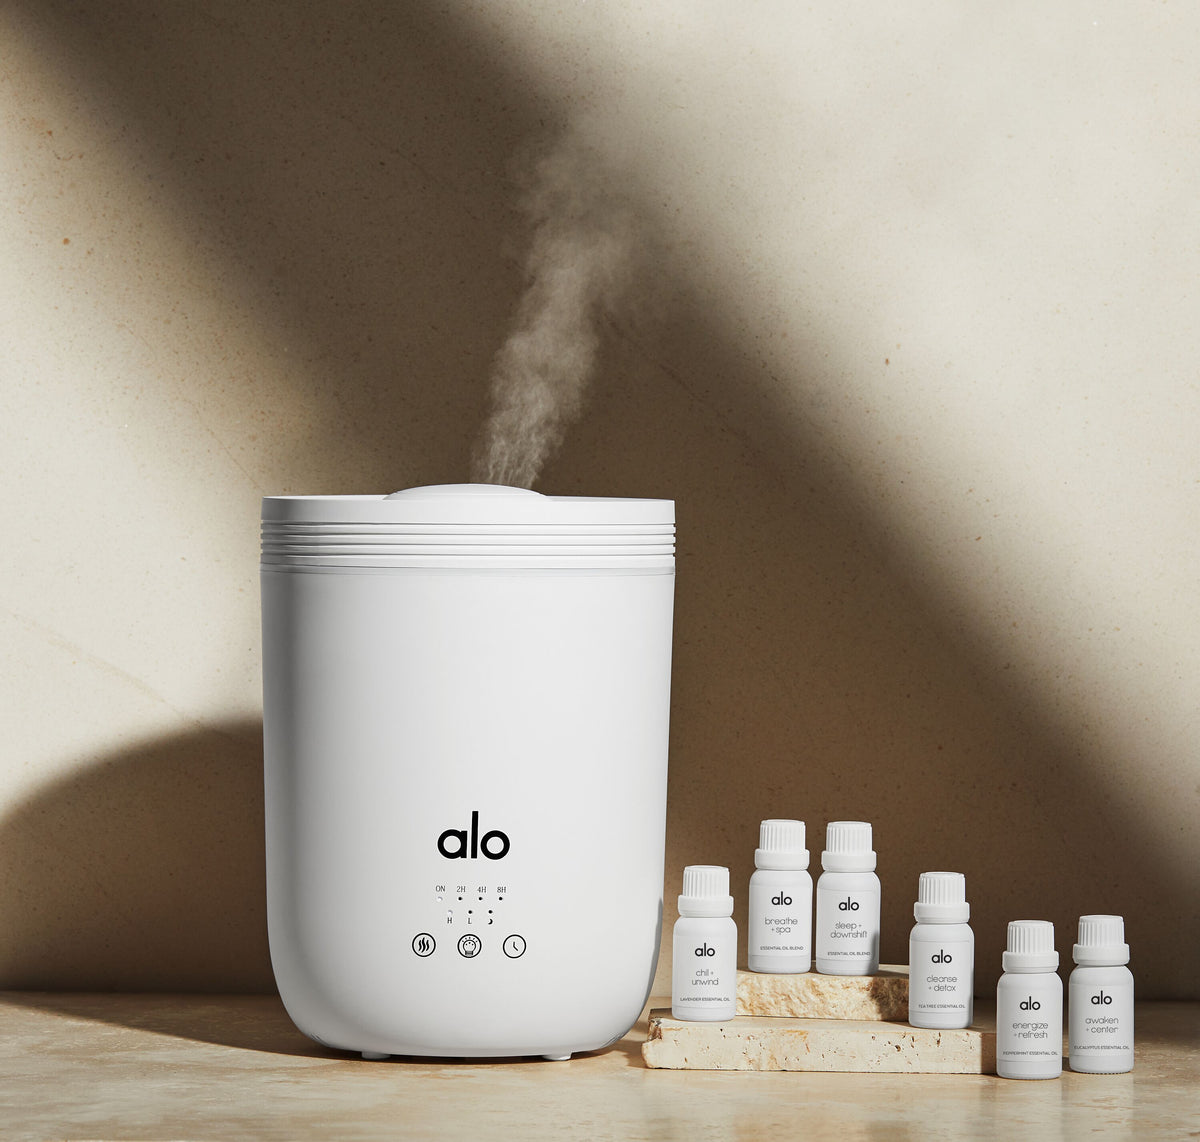 Just Launched: Alo Essential Oils & Aura Diffuser